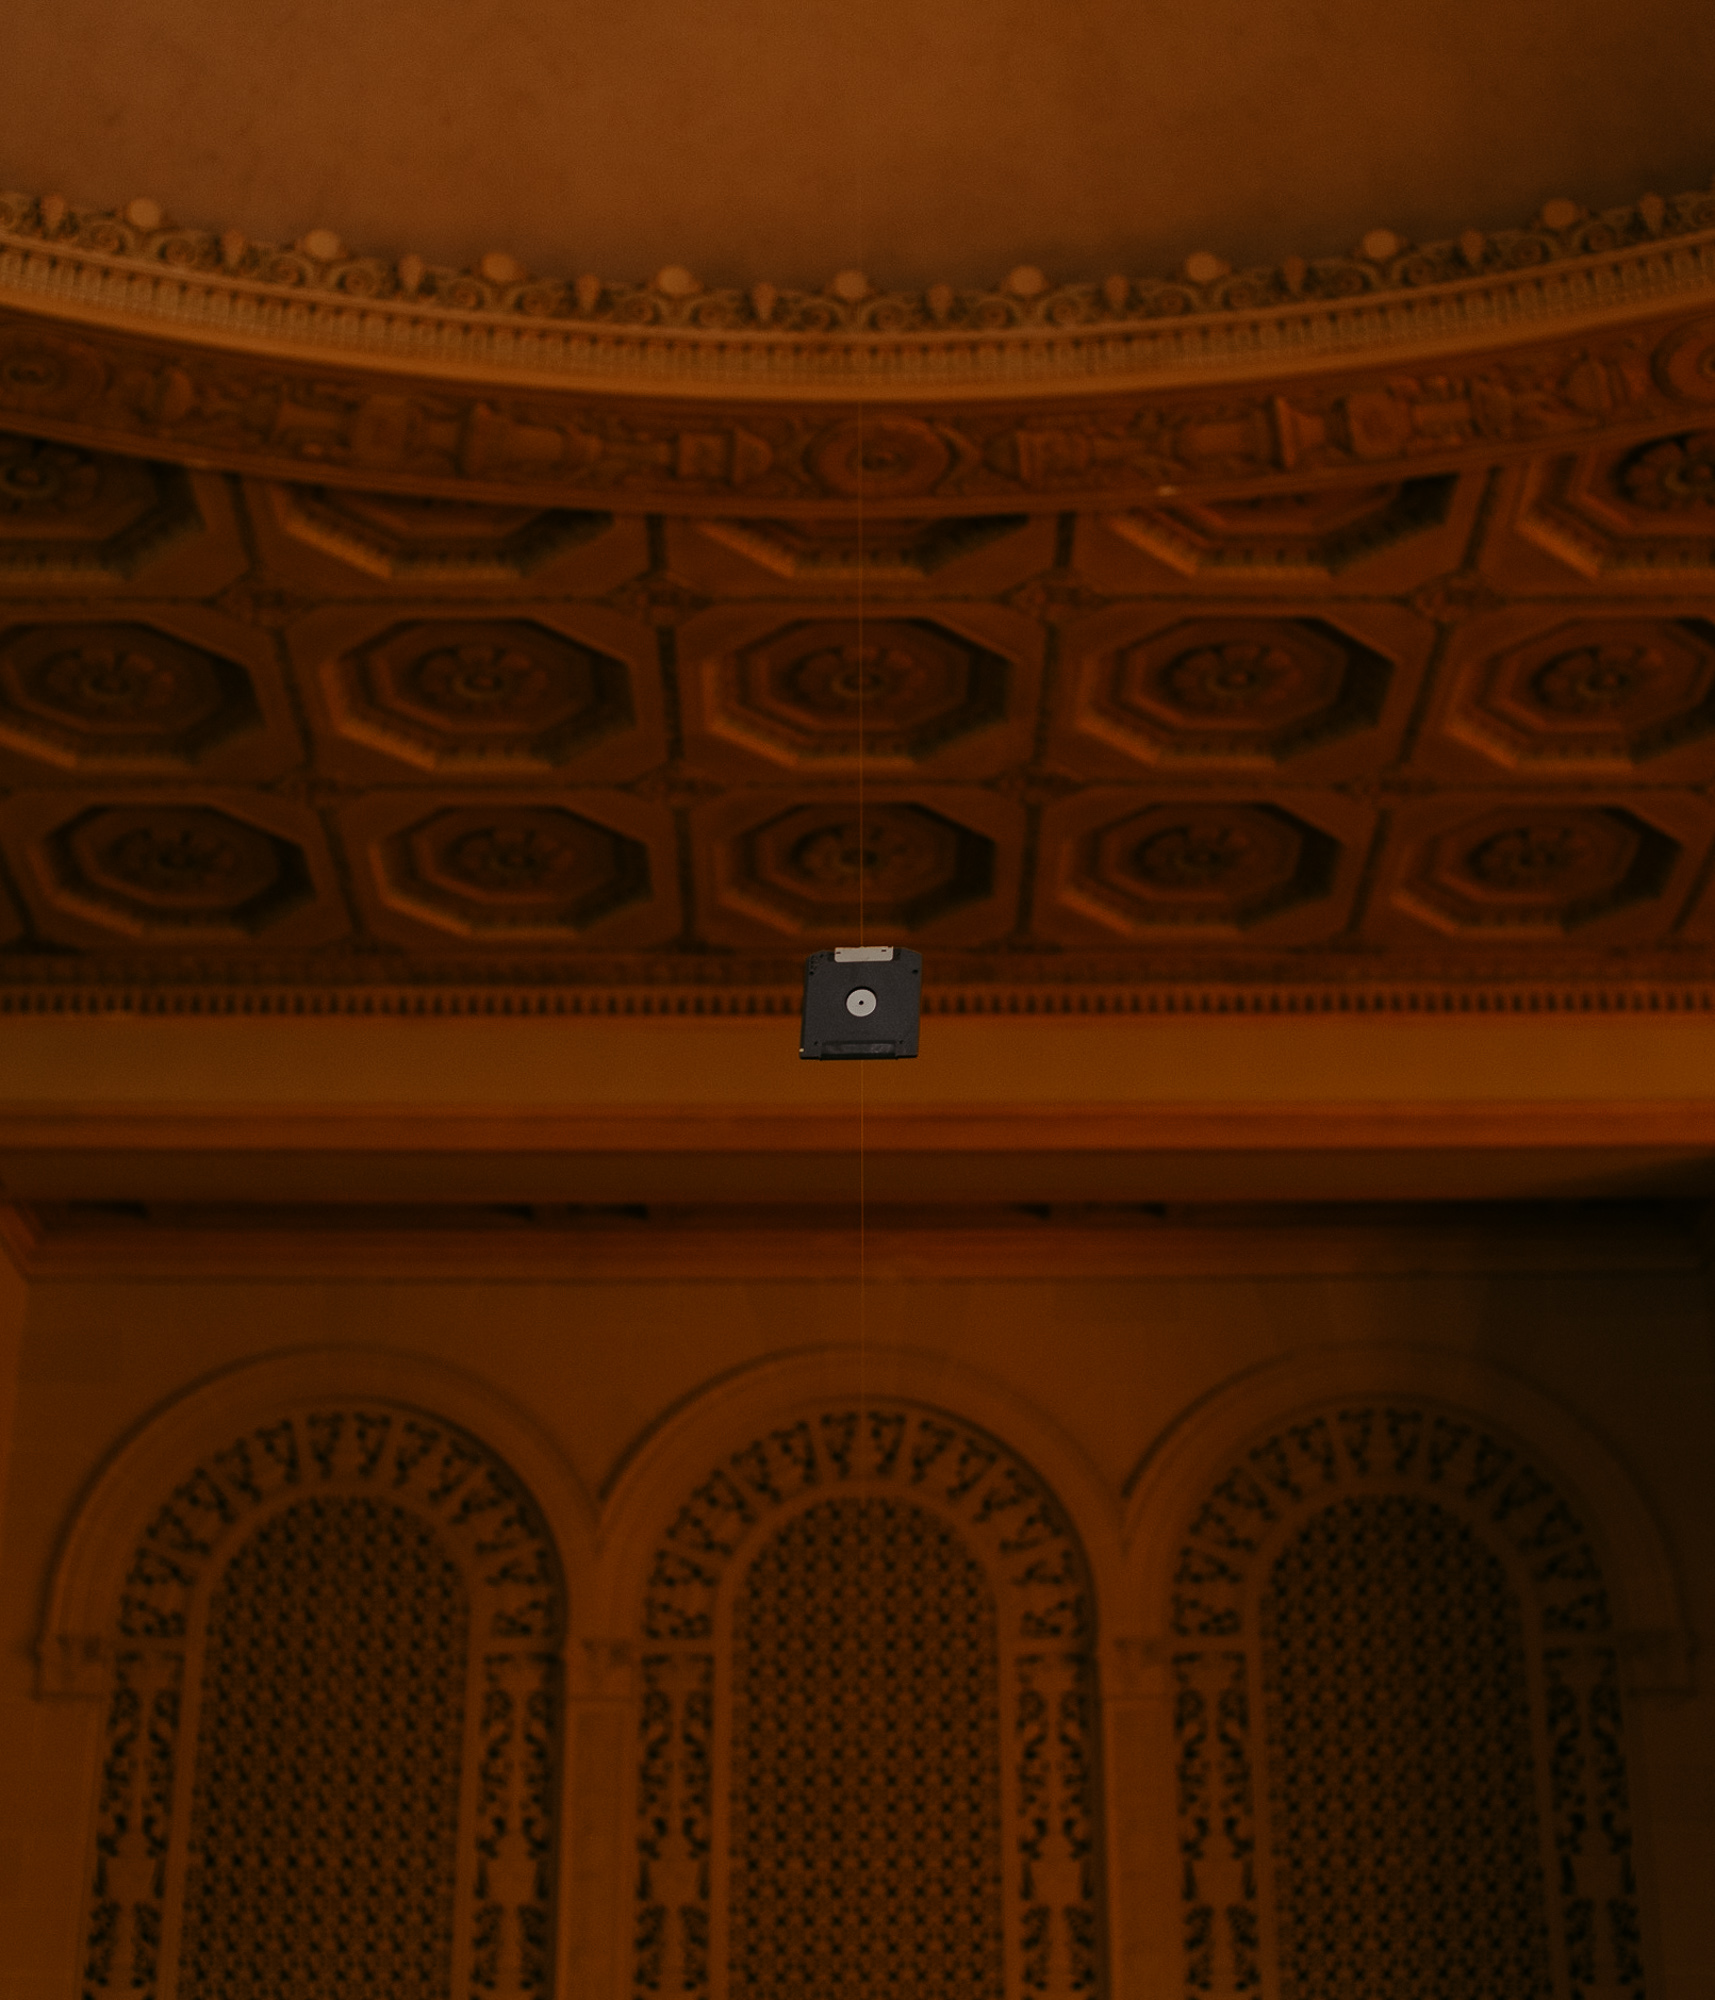 A zip drive on a zip line in the Great Room of the Internet Archive.